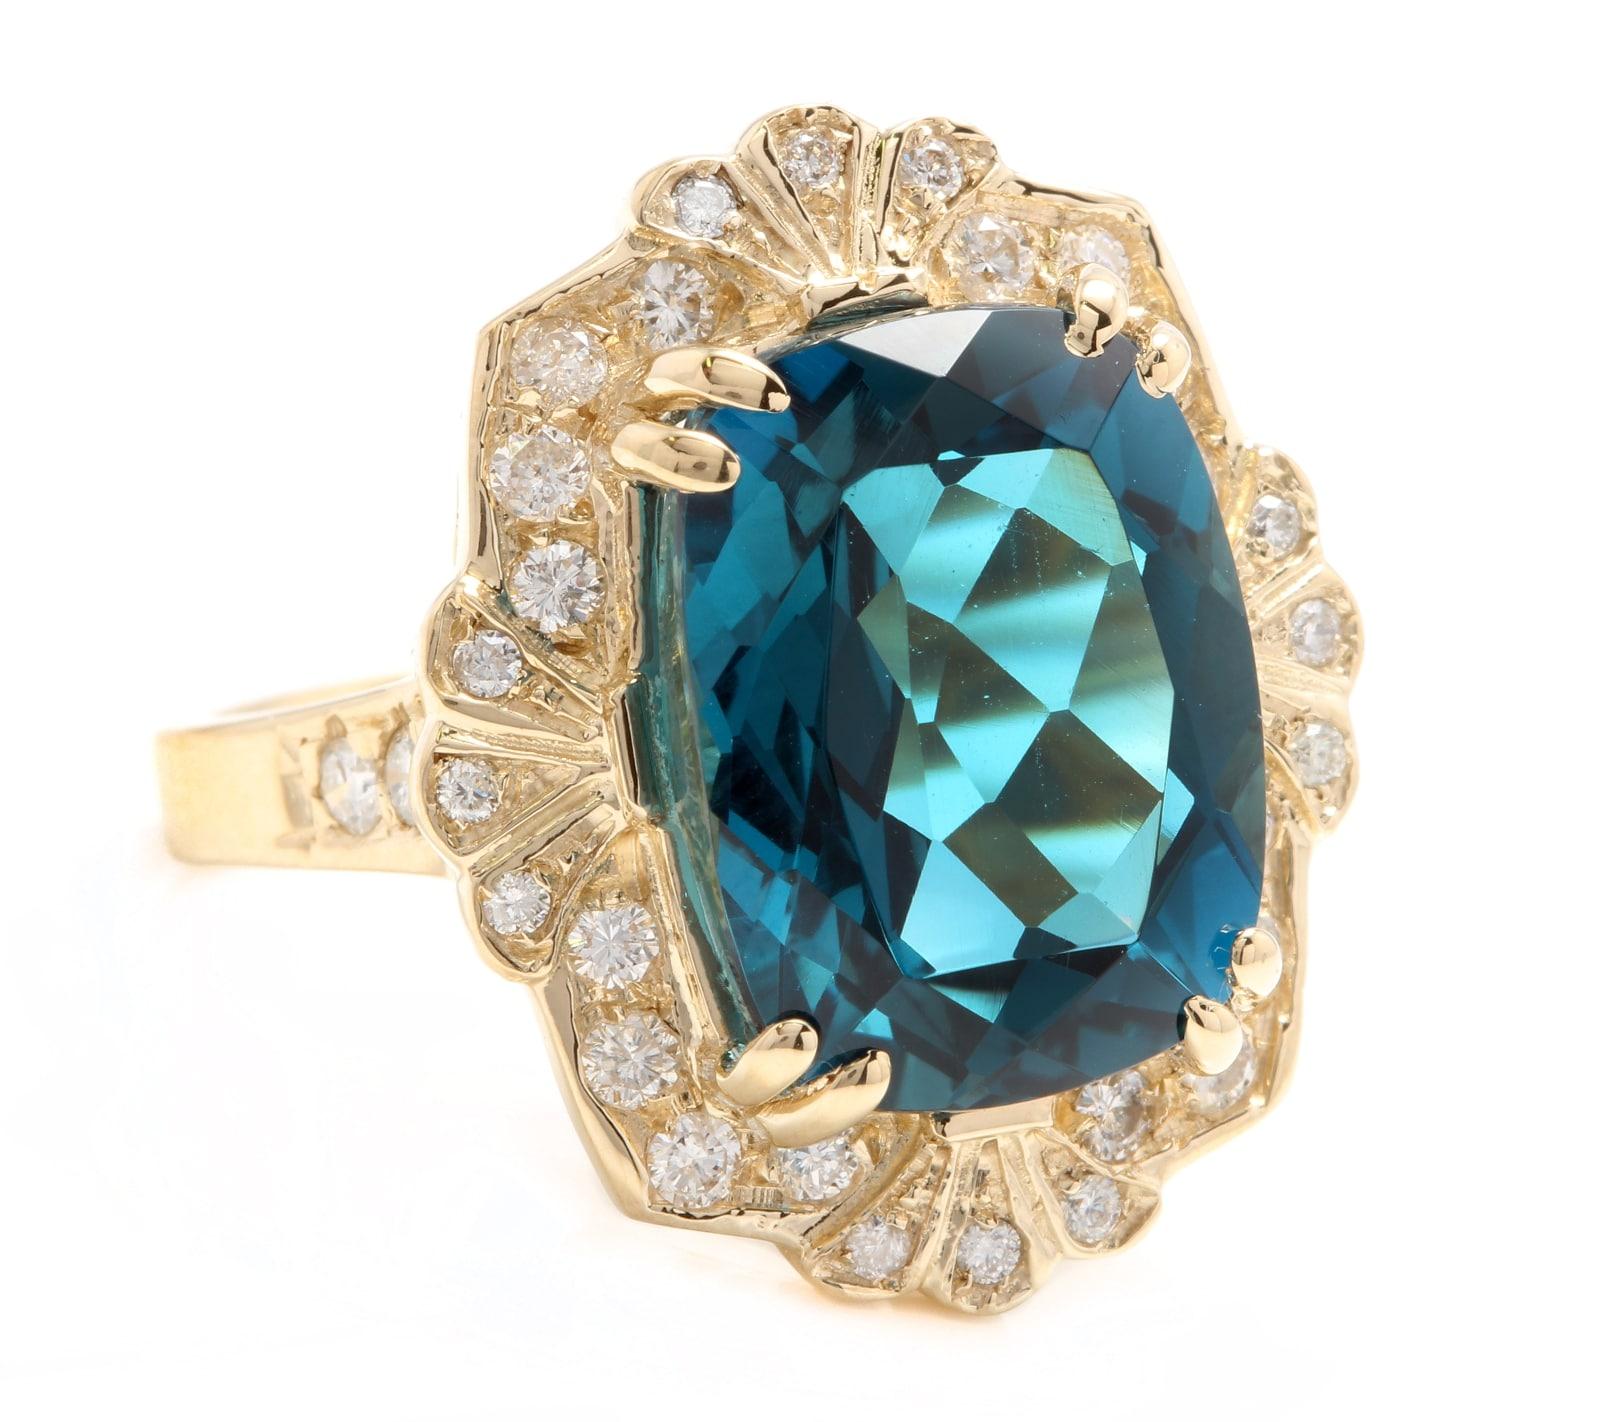 13.75 Carats Natural Impressive London Blue Topaz and Diamond 14K Yellow Gold Ring

Total Natural London Blue Topaz Weight: Approx. 13.00 Carats

London Blue Topaz Measures: 16 x 12mm

Natural Round Diamonds Weight: 0.75 Carats (color G-H / Clarity